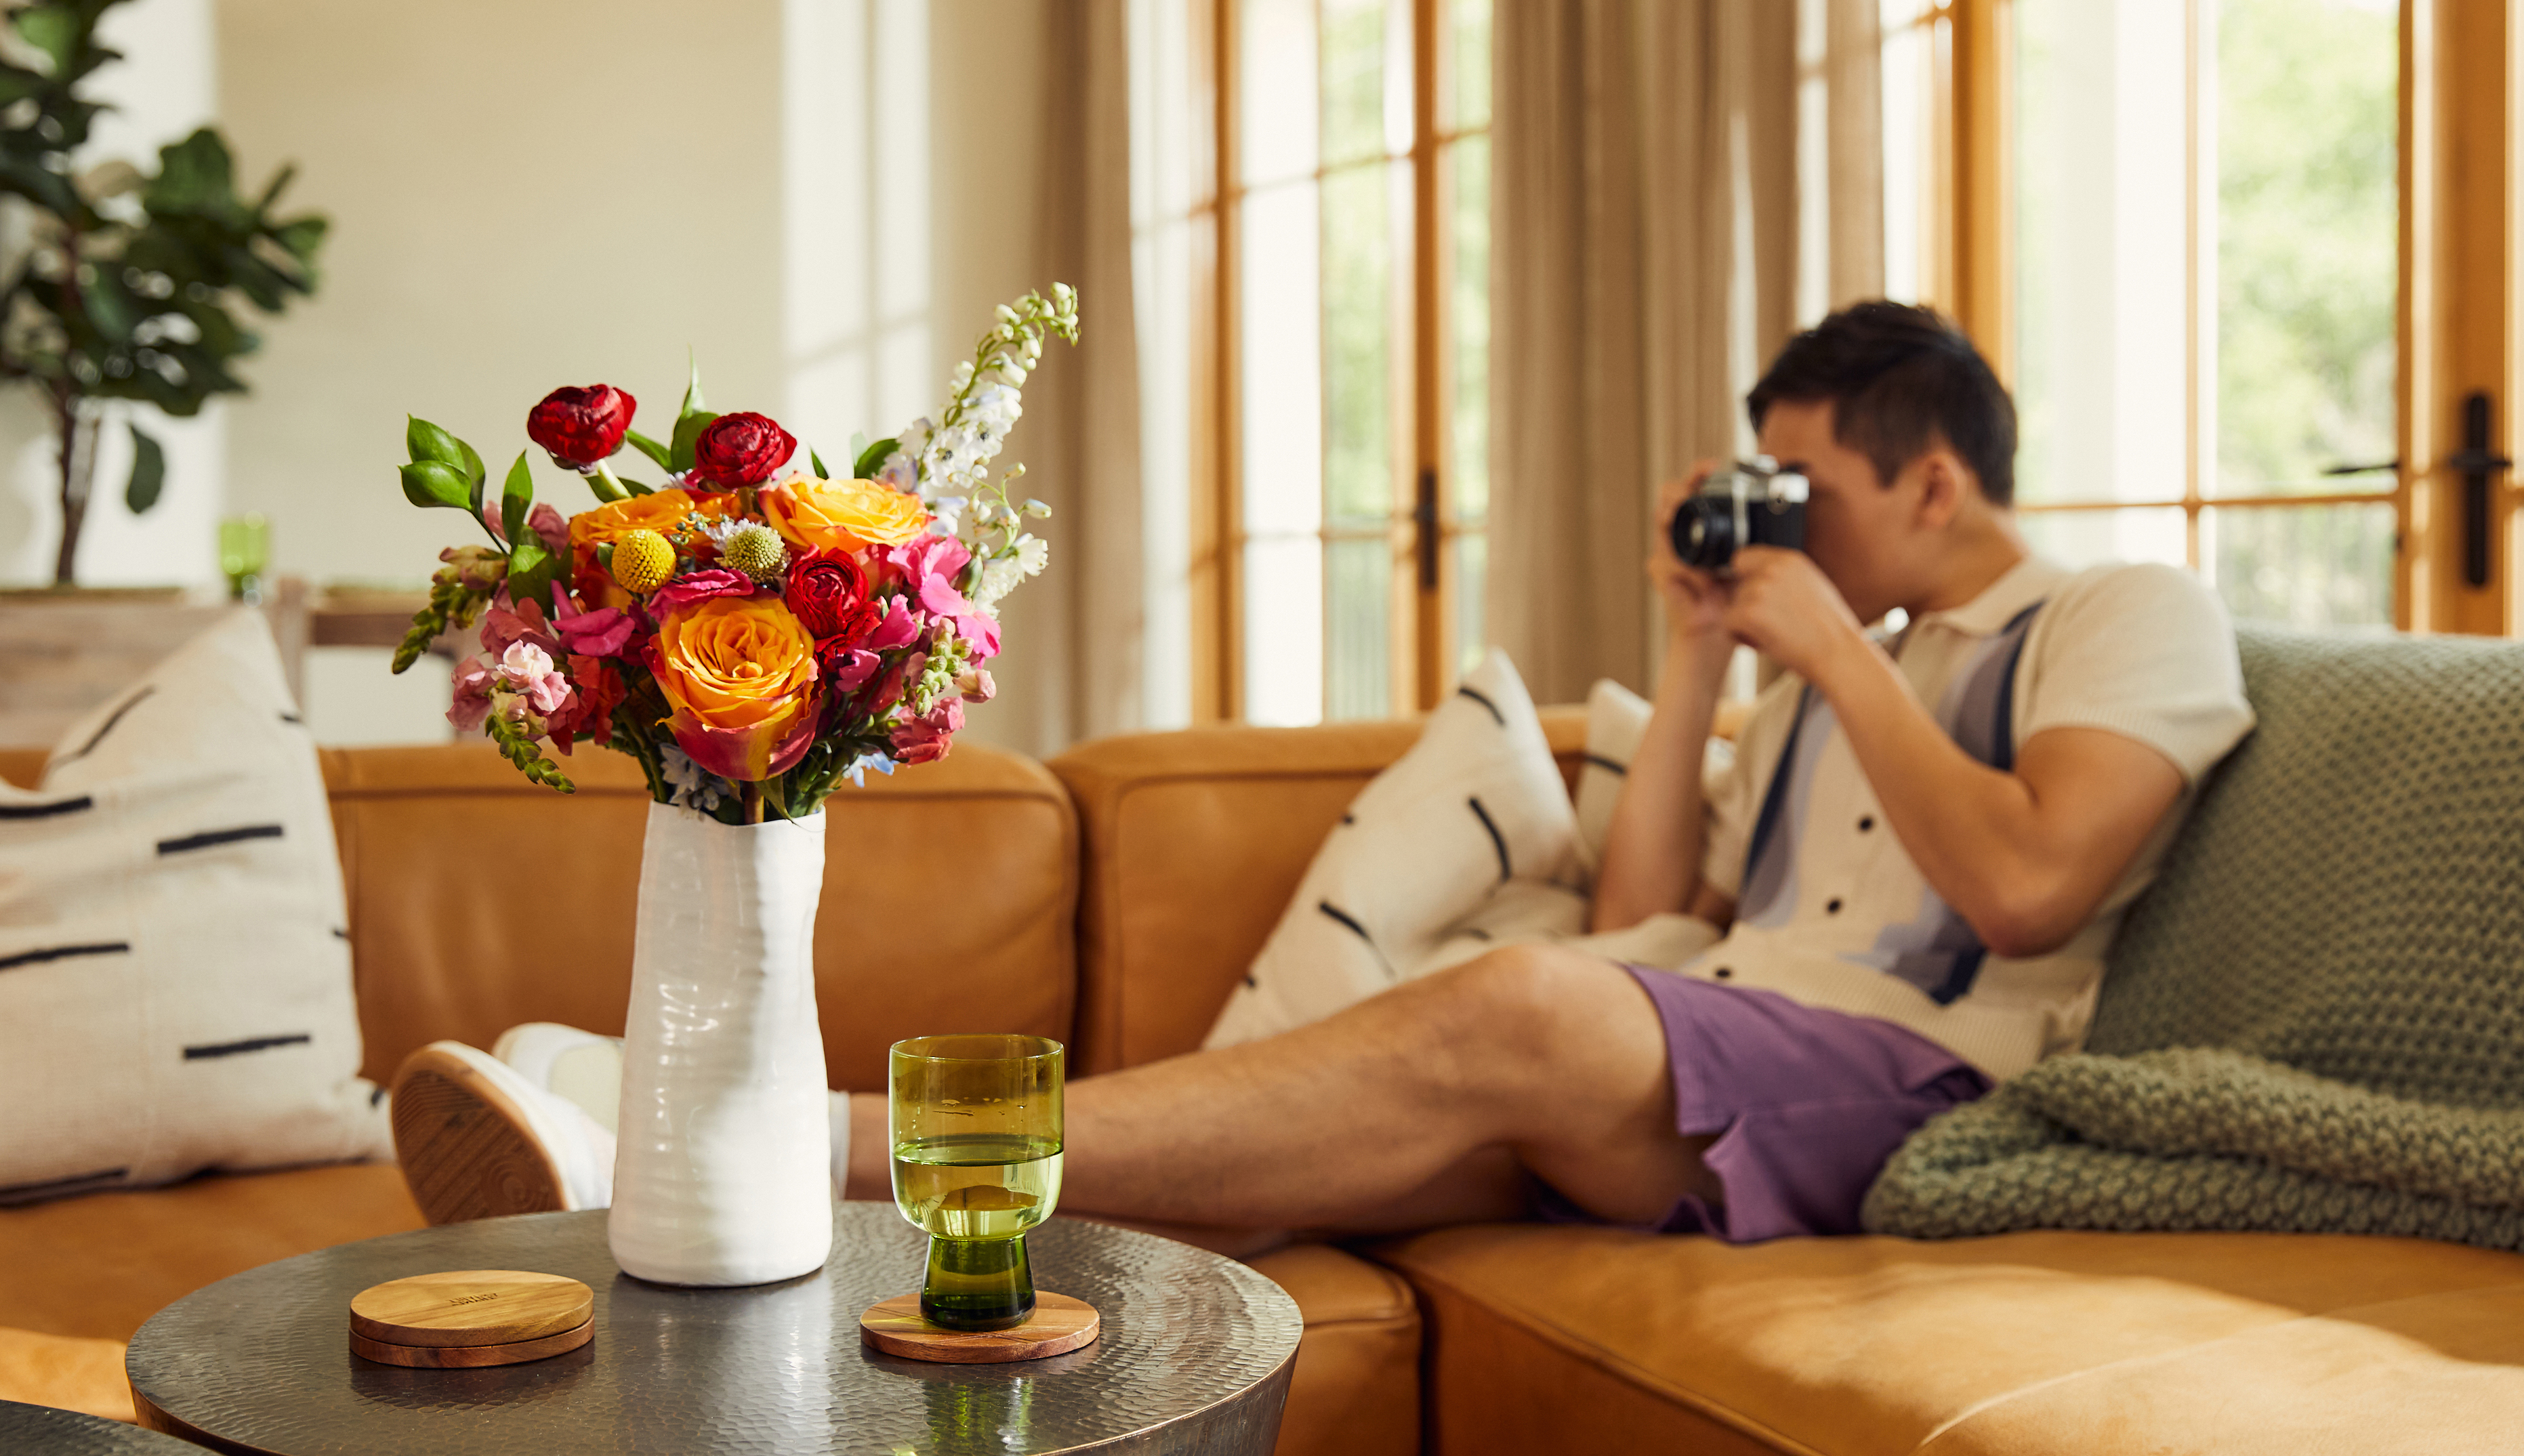 Man relaxing on a couch with a bouquet fo fresh flowers on the coffee table